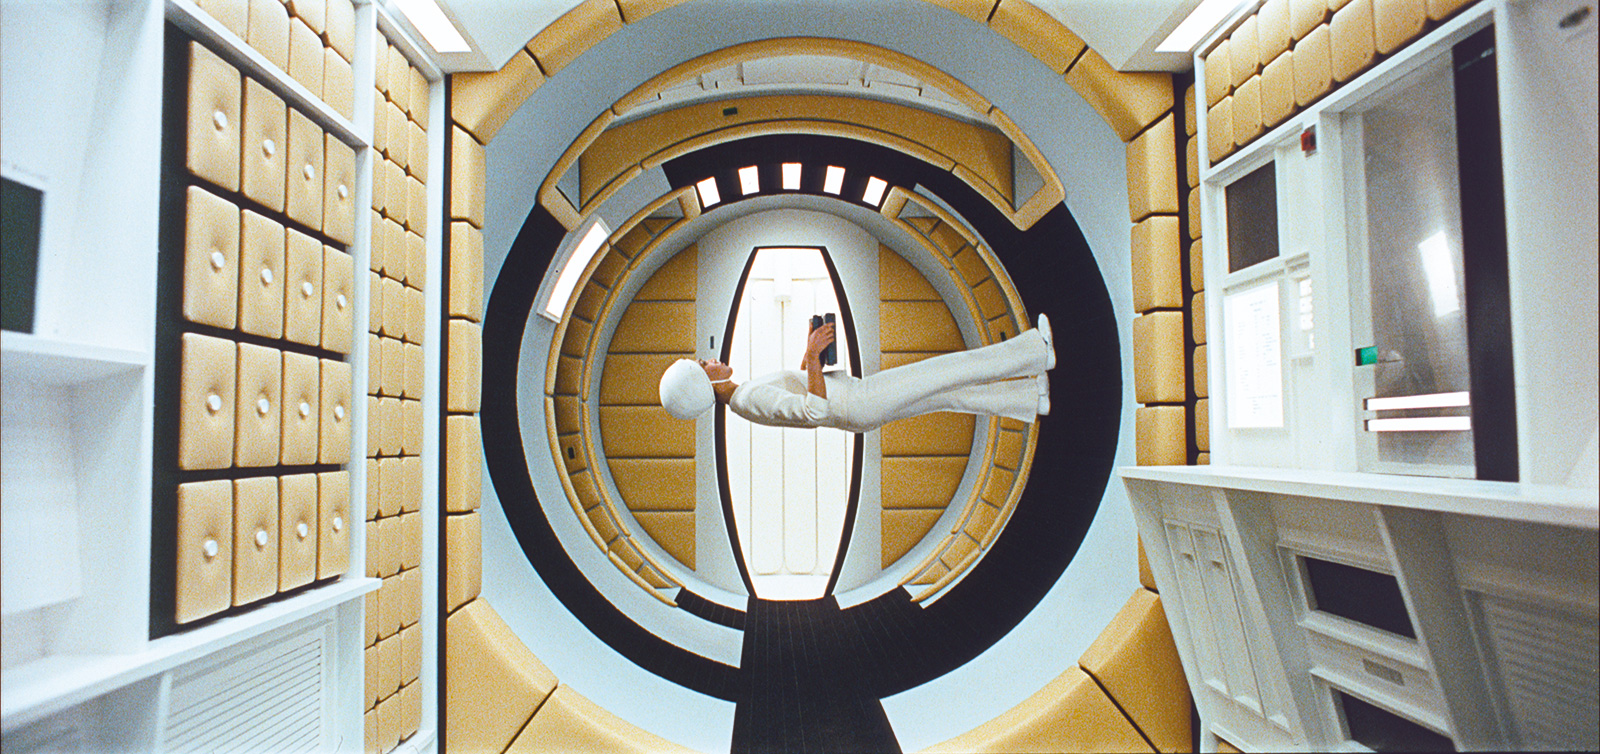 The centrifuge stage in 2001: A Space Odyssey. (c) The Stanley Kubrick Archive